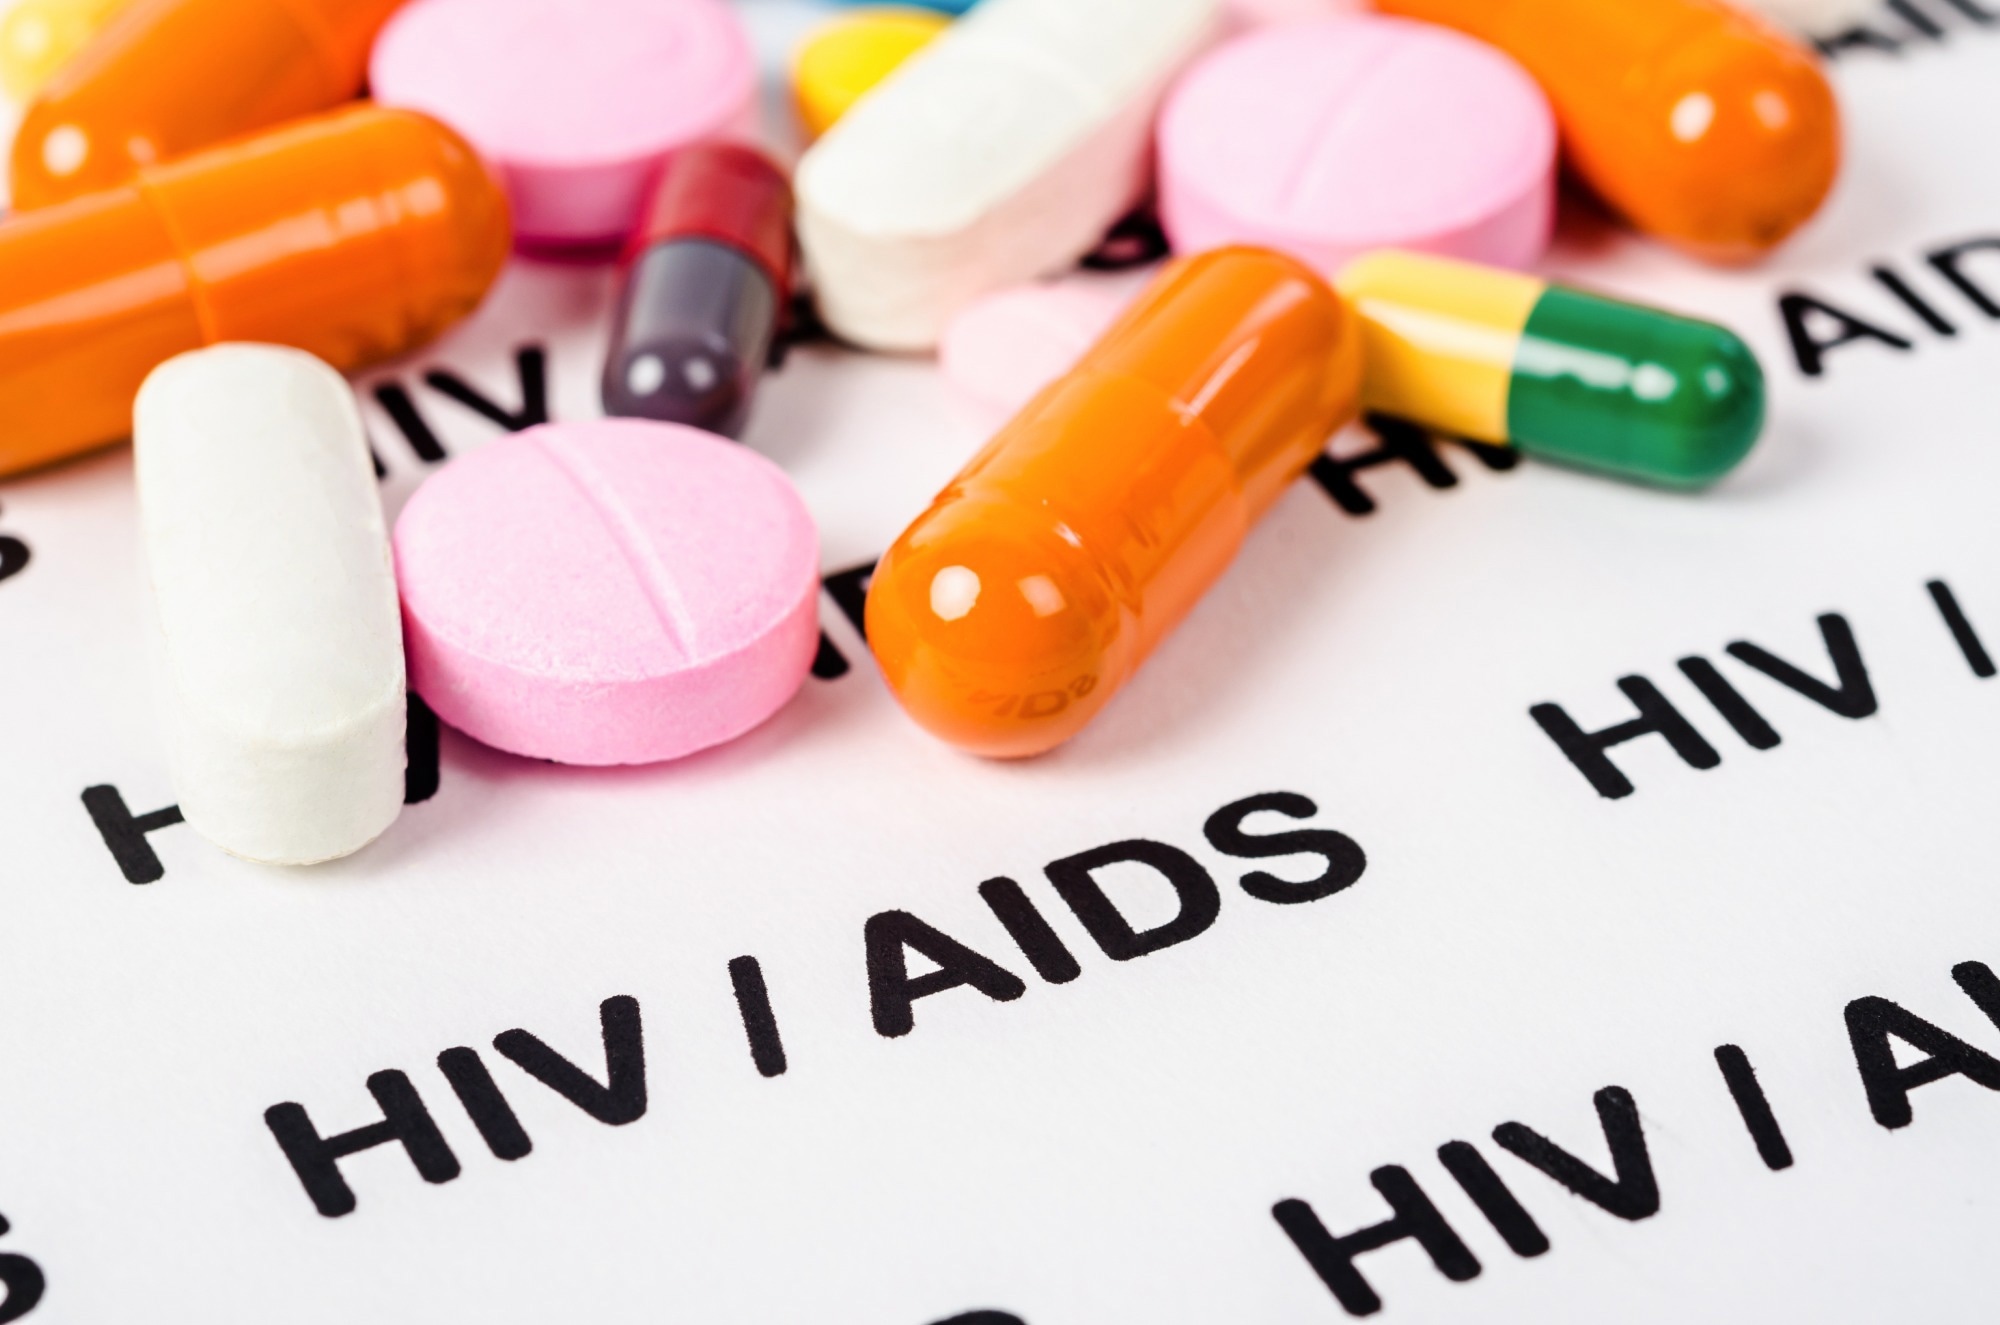 Study: Use of Tenofovir Alafenamide Fumarate for HIV Pre-Exposure Prophylaxis and Incidence of Hypertension and Initiation of Statins. Image Credit: PENpics Studio/Shutterstock.com